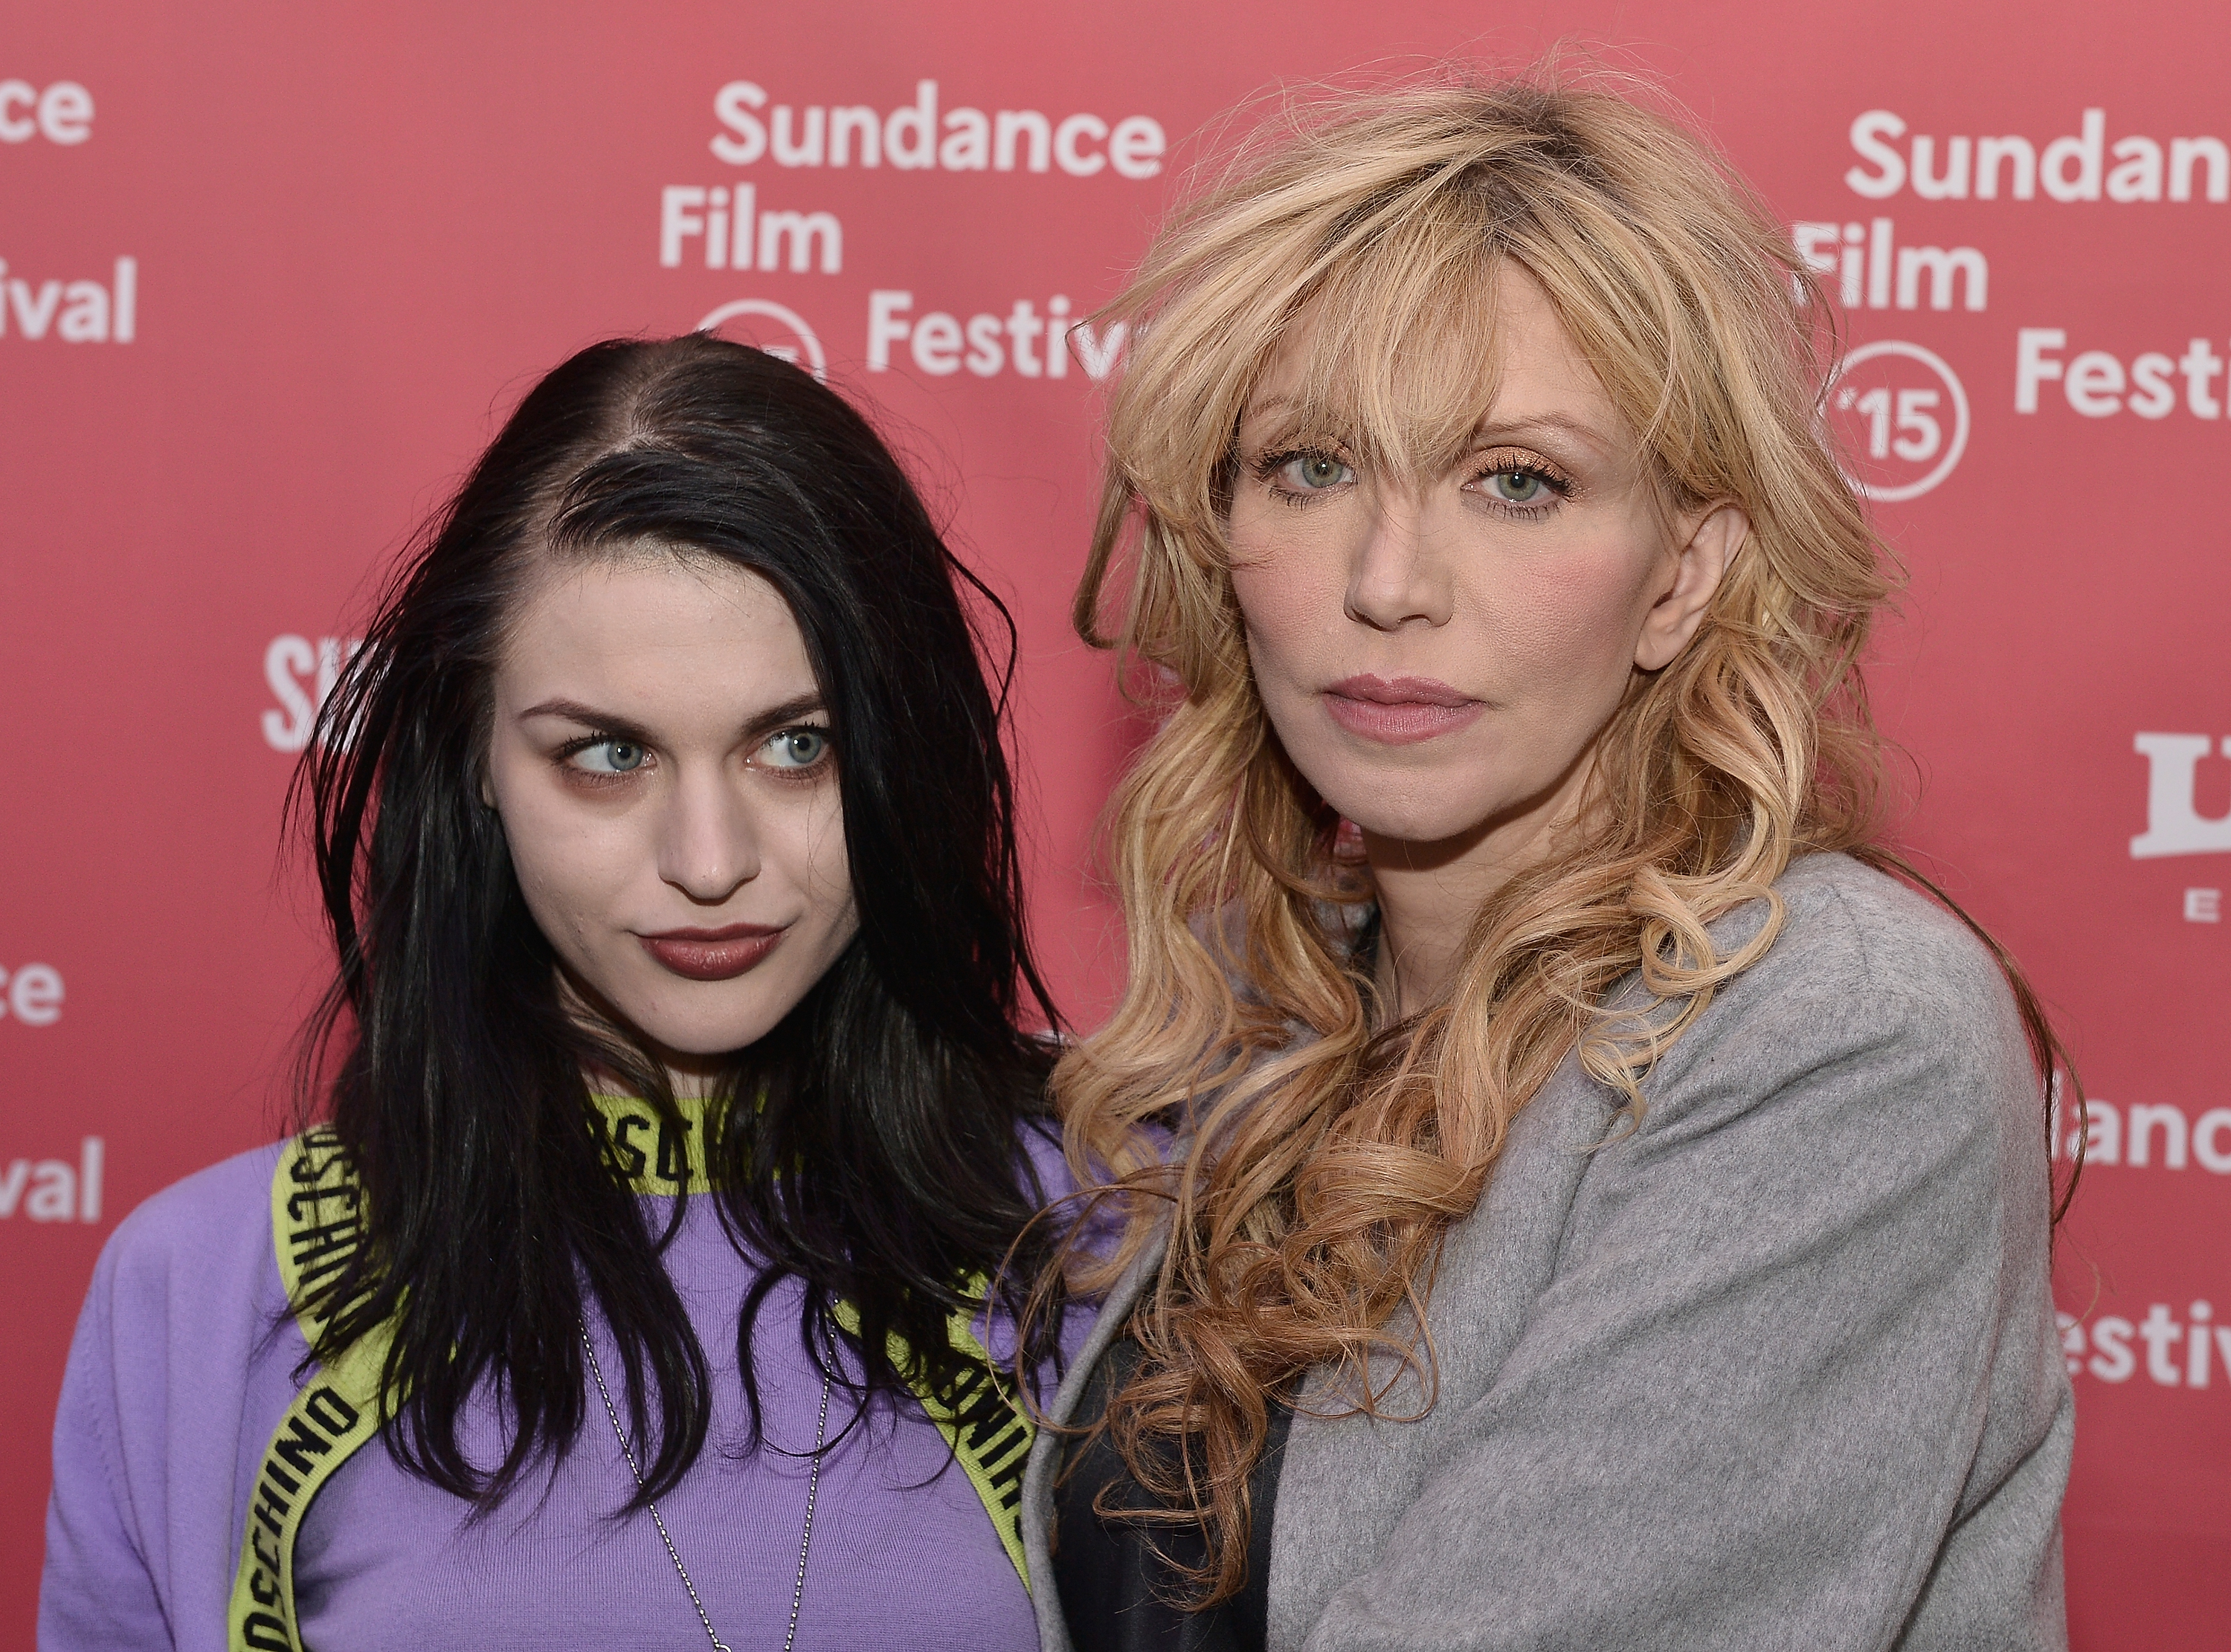 The famous singer and her daughter at the premiere of the HBO Documentary "Kurt Cobain: Montage of Heck" in Park City, Utah on January 24, 2015 | Source: Getty Images